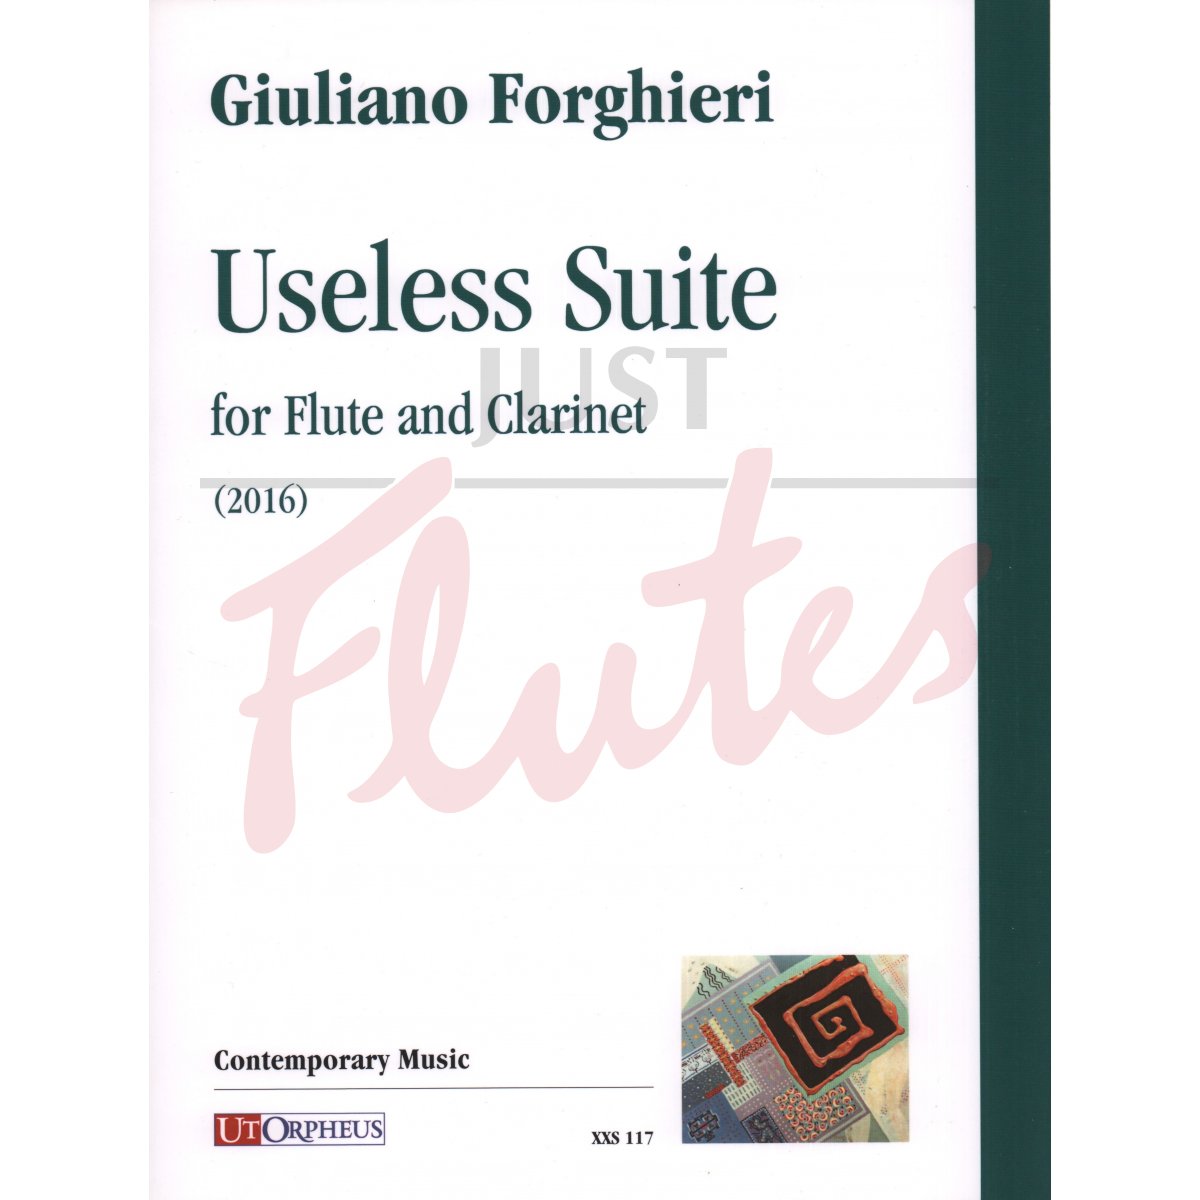 Useless Suite for Flute and Clarinet